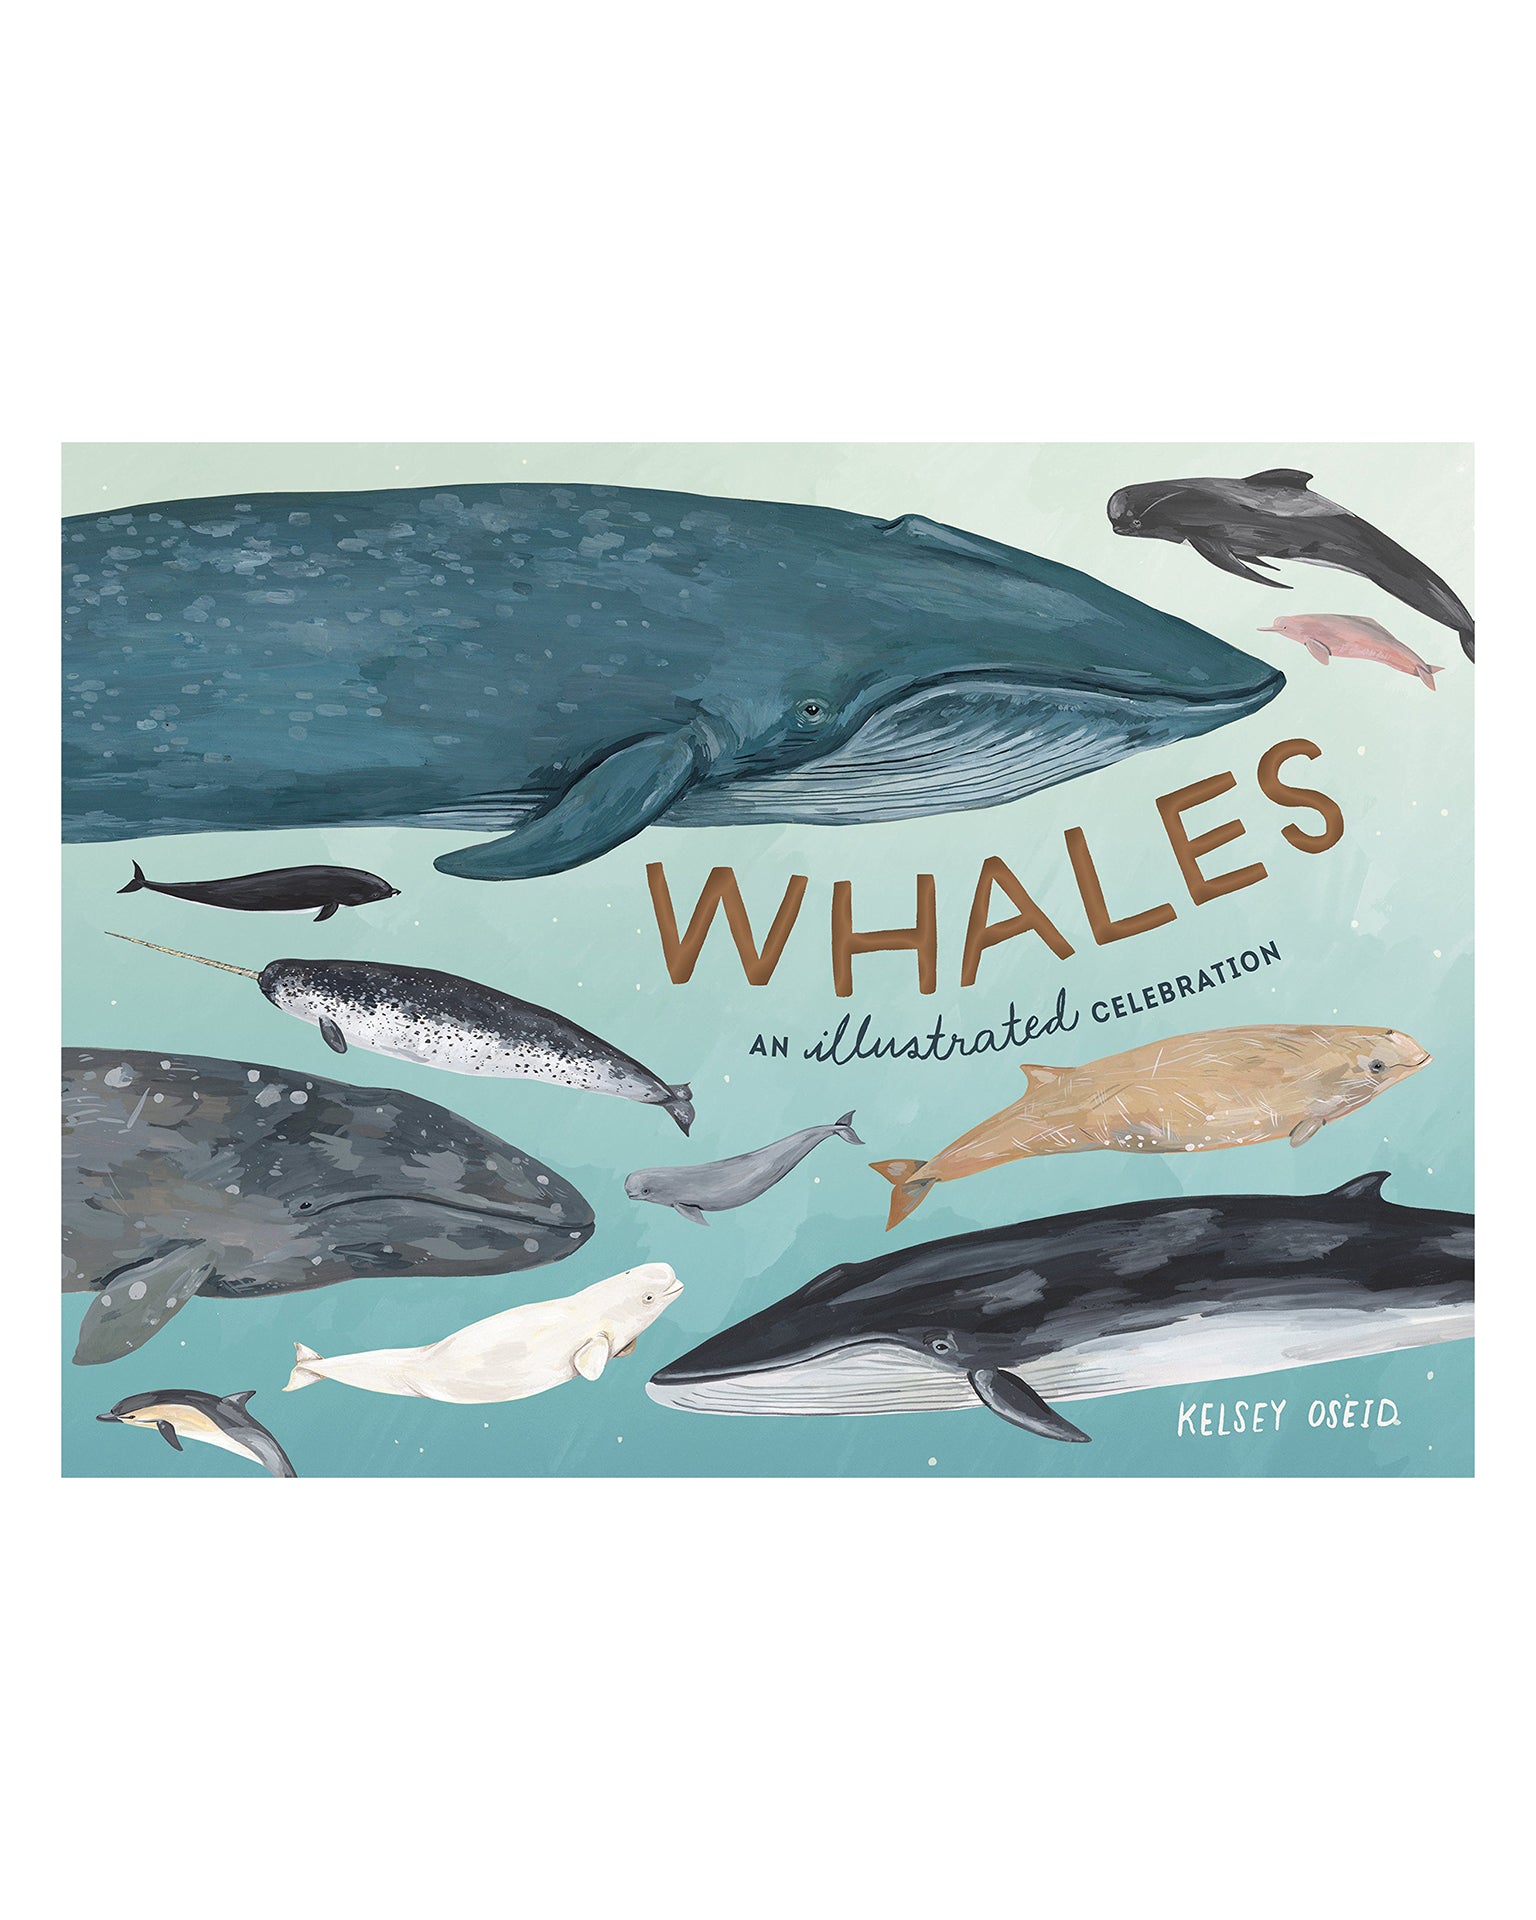 Little random house play whales: an illustrated celebration